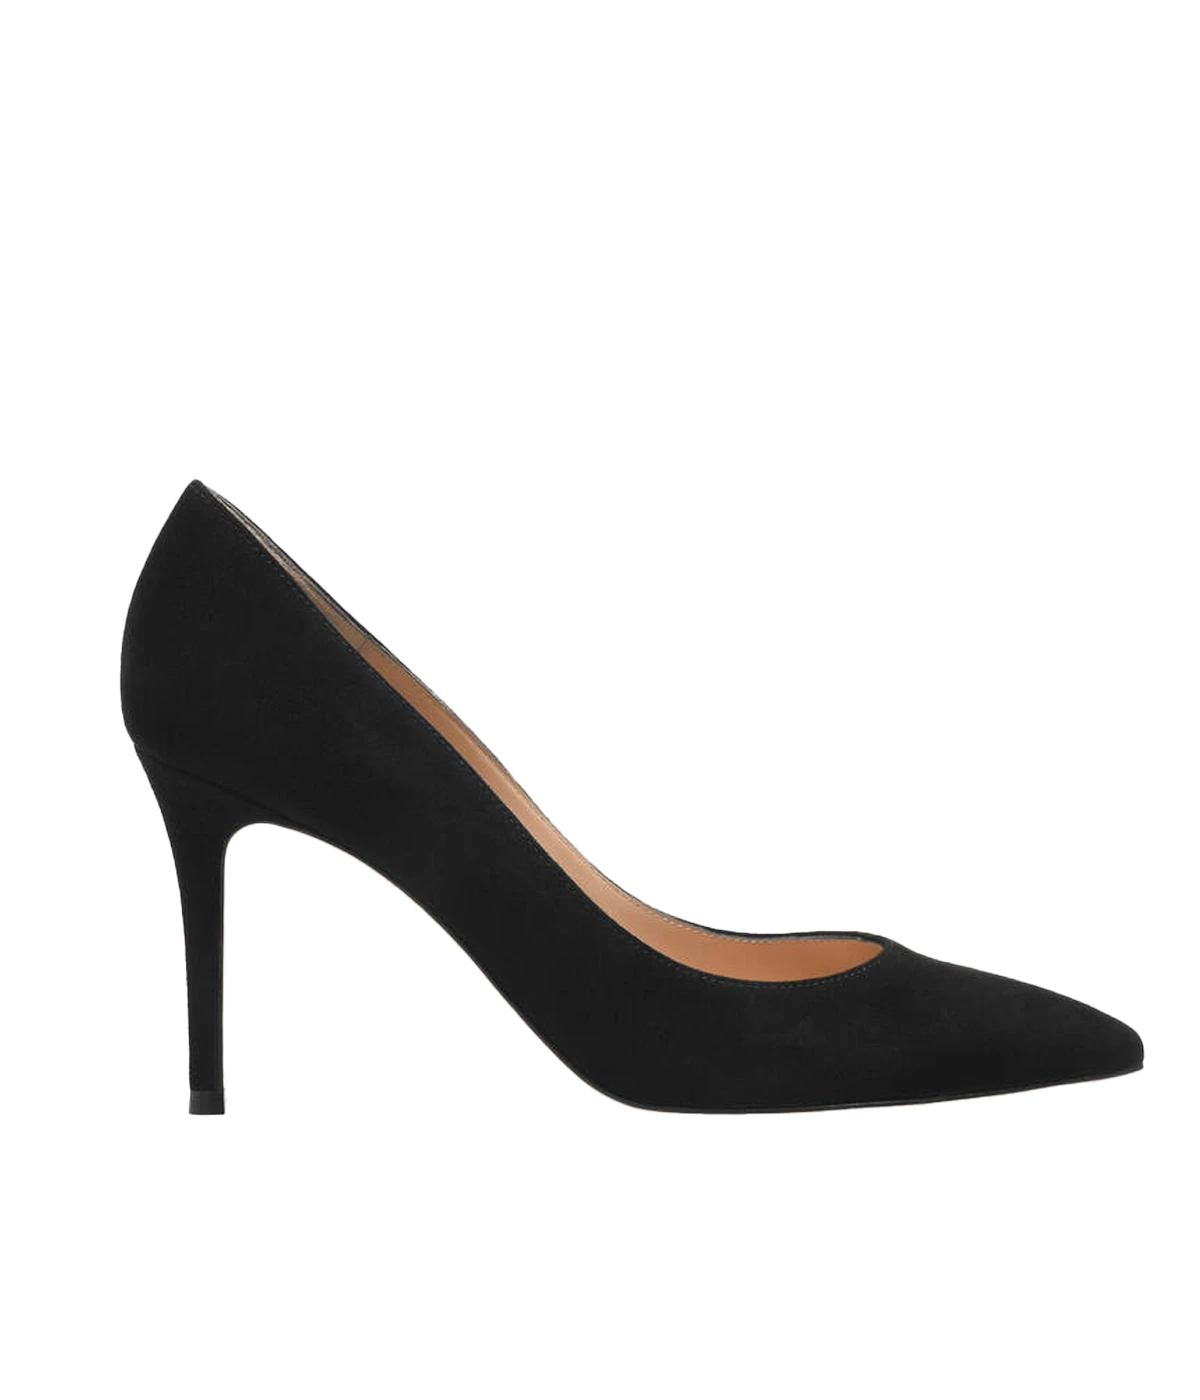 Image of a black suede 85mm pump. Featuring a pointed toe and beige sole. 